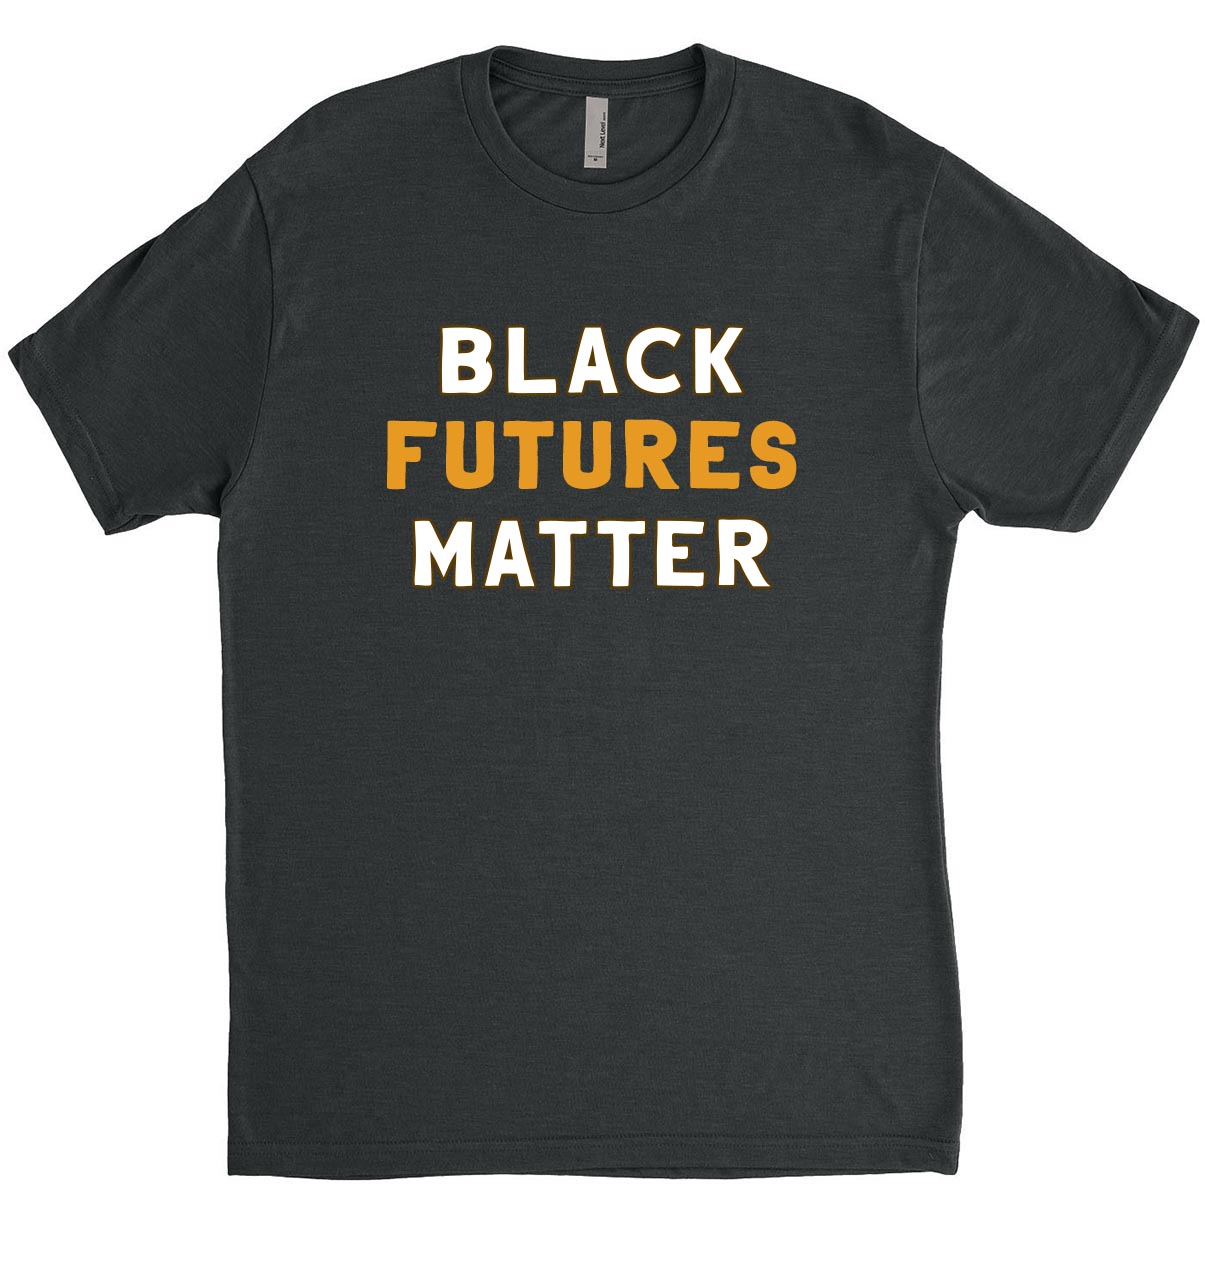 BLACK FUTURES MATTER  NEXT LEVEL UNISEX TRIBLEND TEE  classic fit - humanKIND shop with a purpose